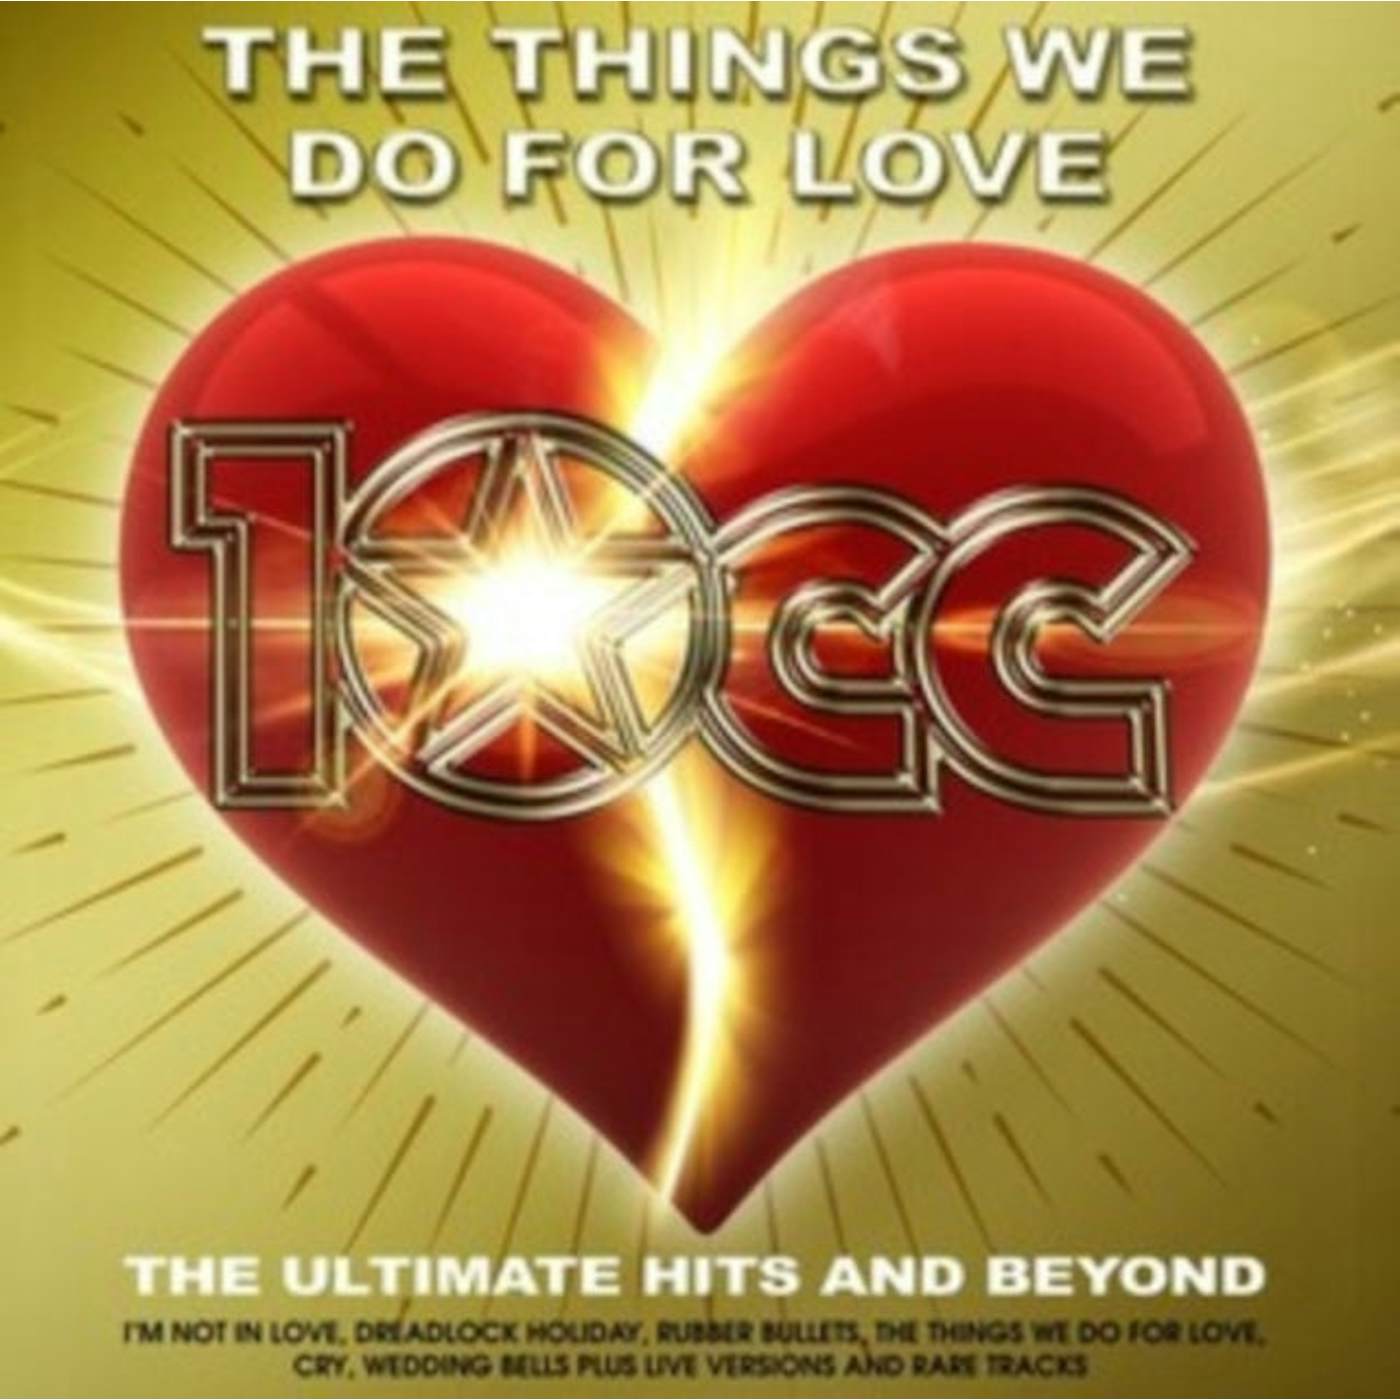 10cc CD - The Things We Do For Love: The Ultimate Hits & Beyond